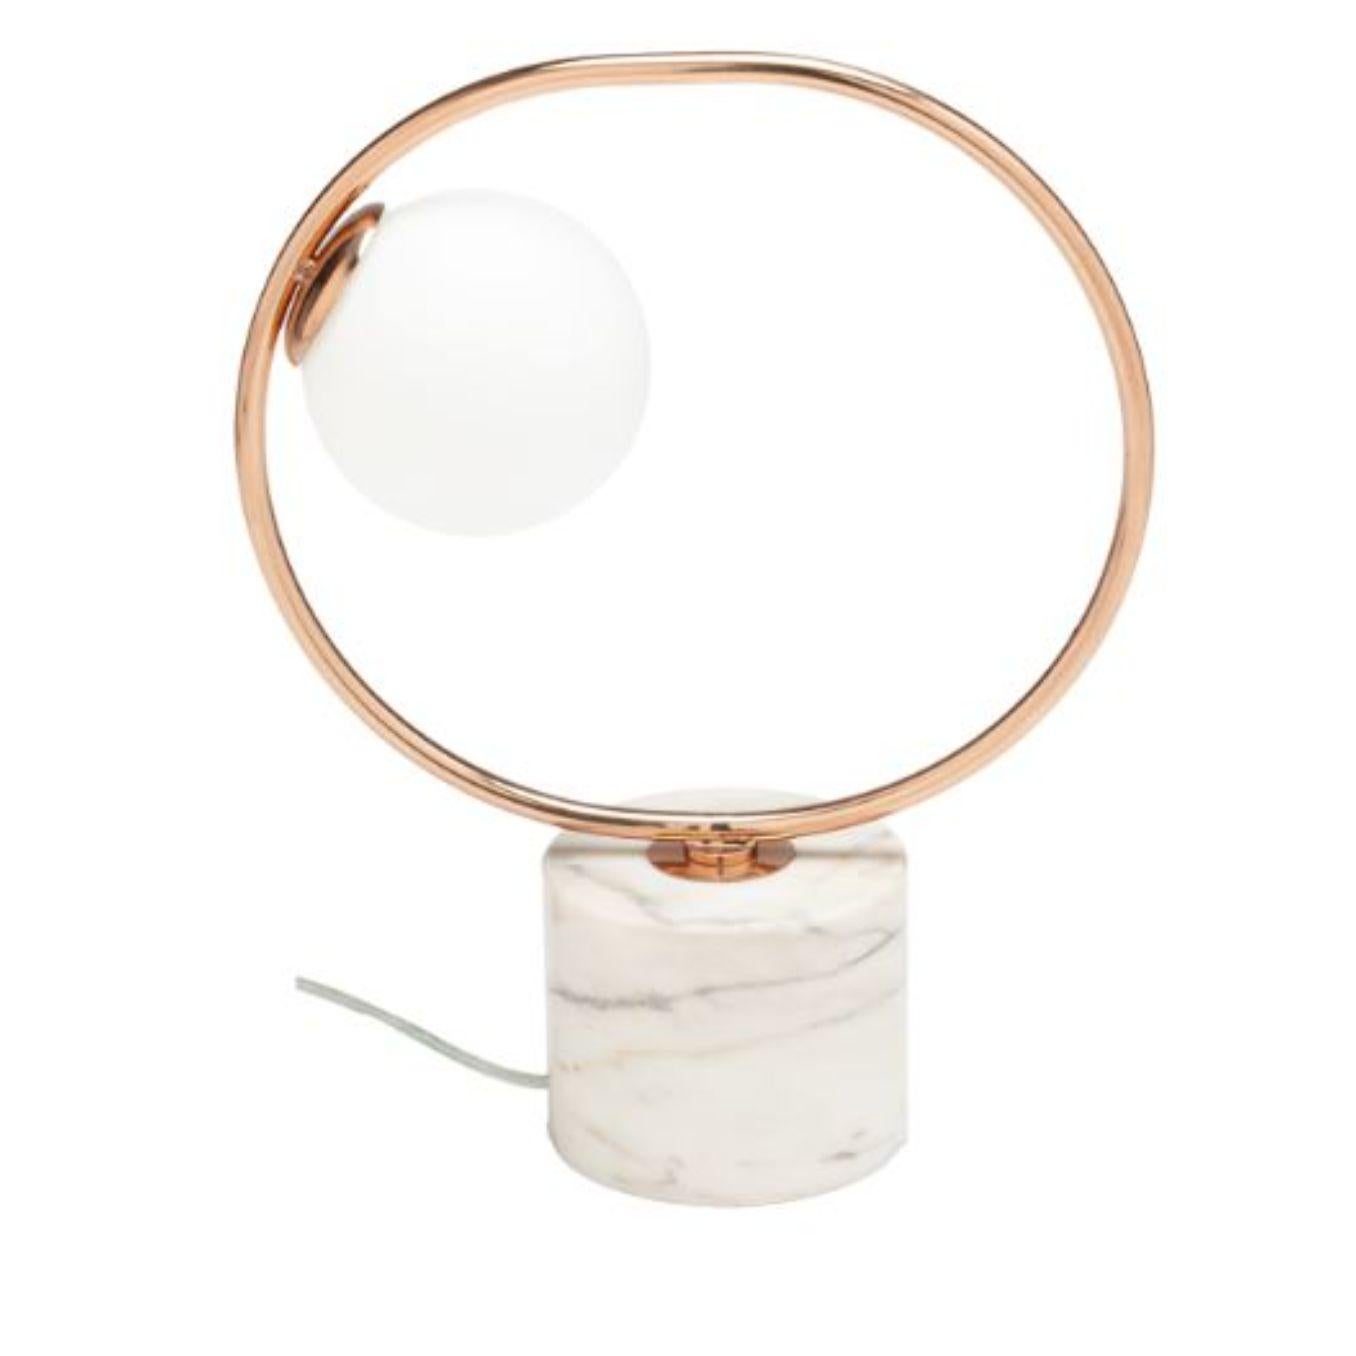 Copper loop table lamp with marble base by Dooq
Dimensions: W 36 x D 15 x H 38 cm
Materials: lacquered metal, polished or brushed metal, copper. 
Also available in different colours and materials.

Information:
230V/50Hz
1 x max. G9
4W